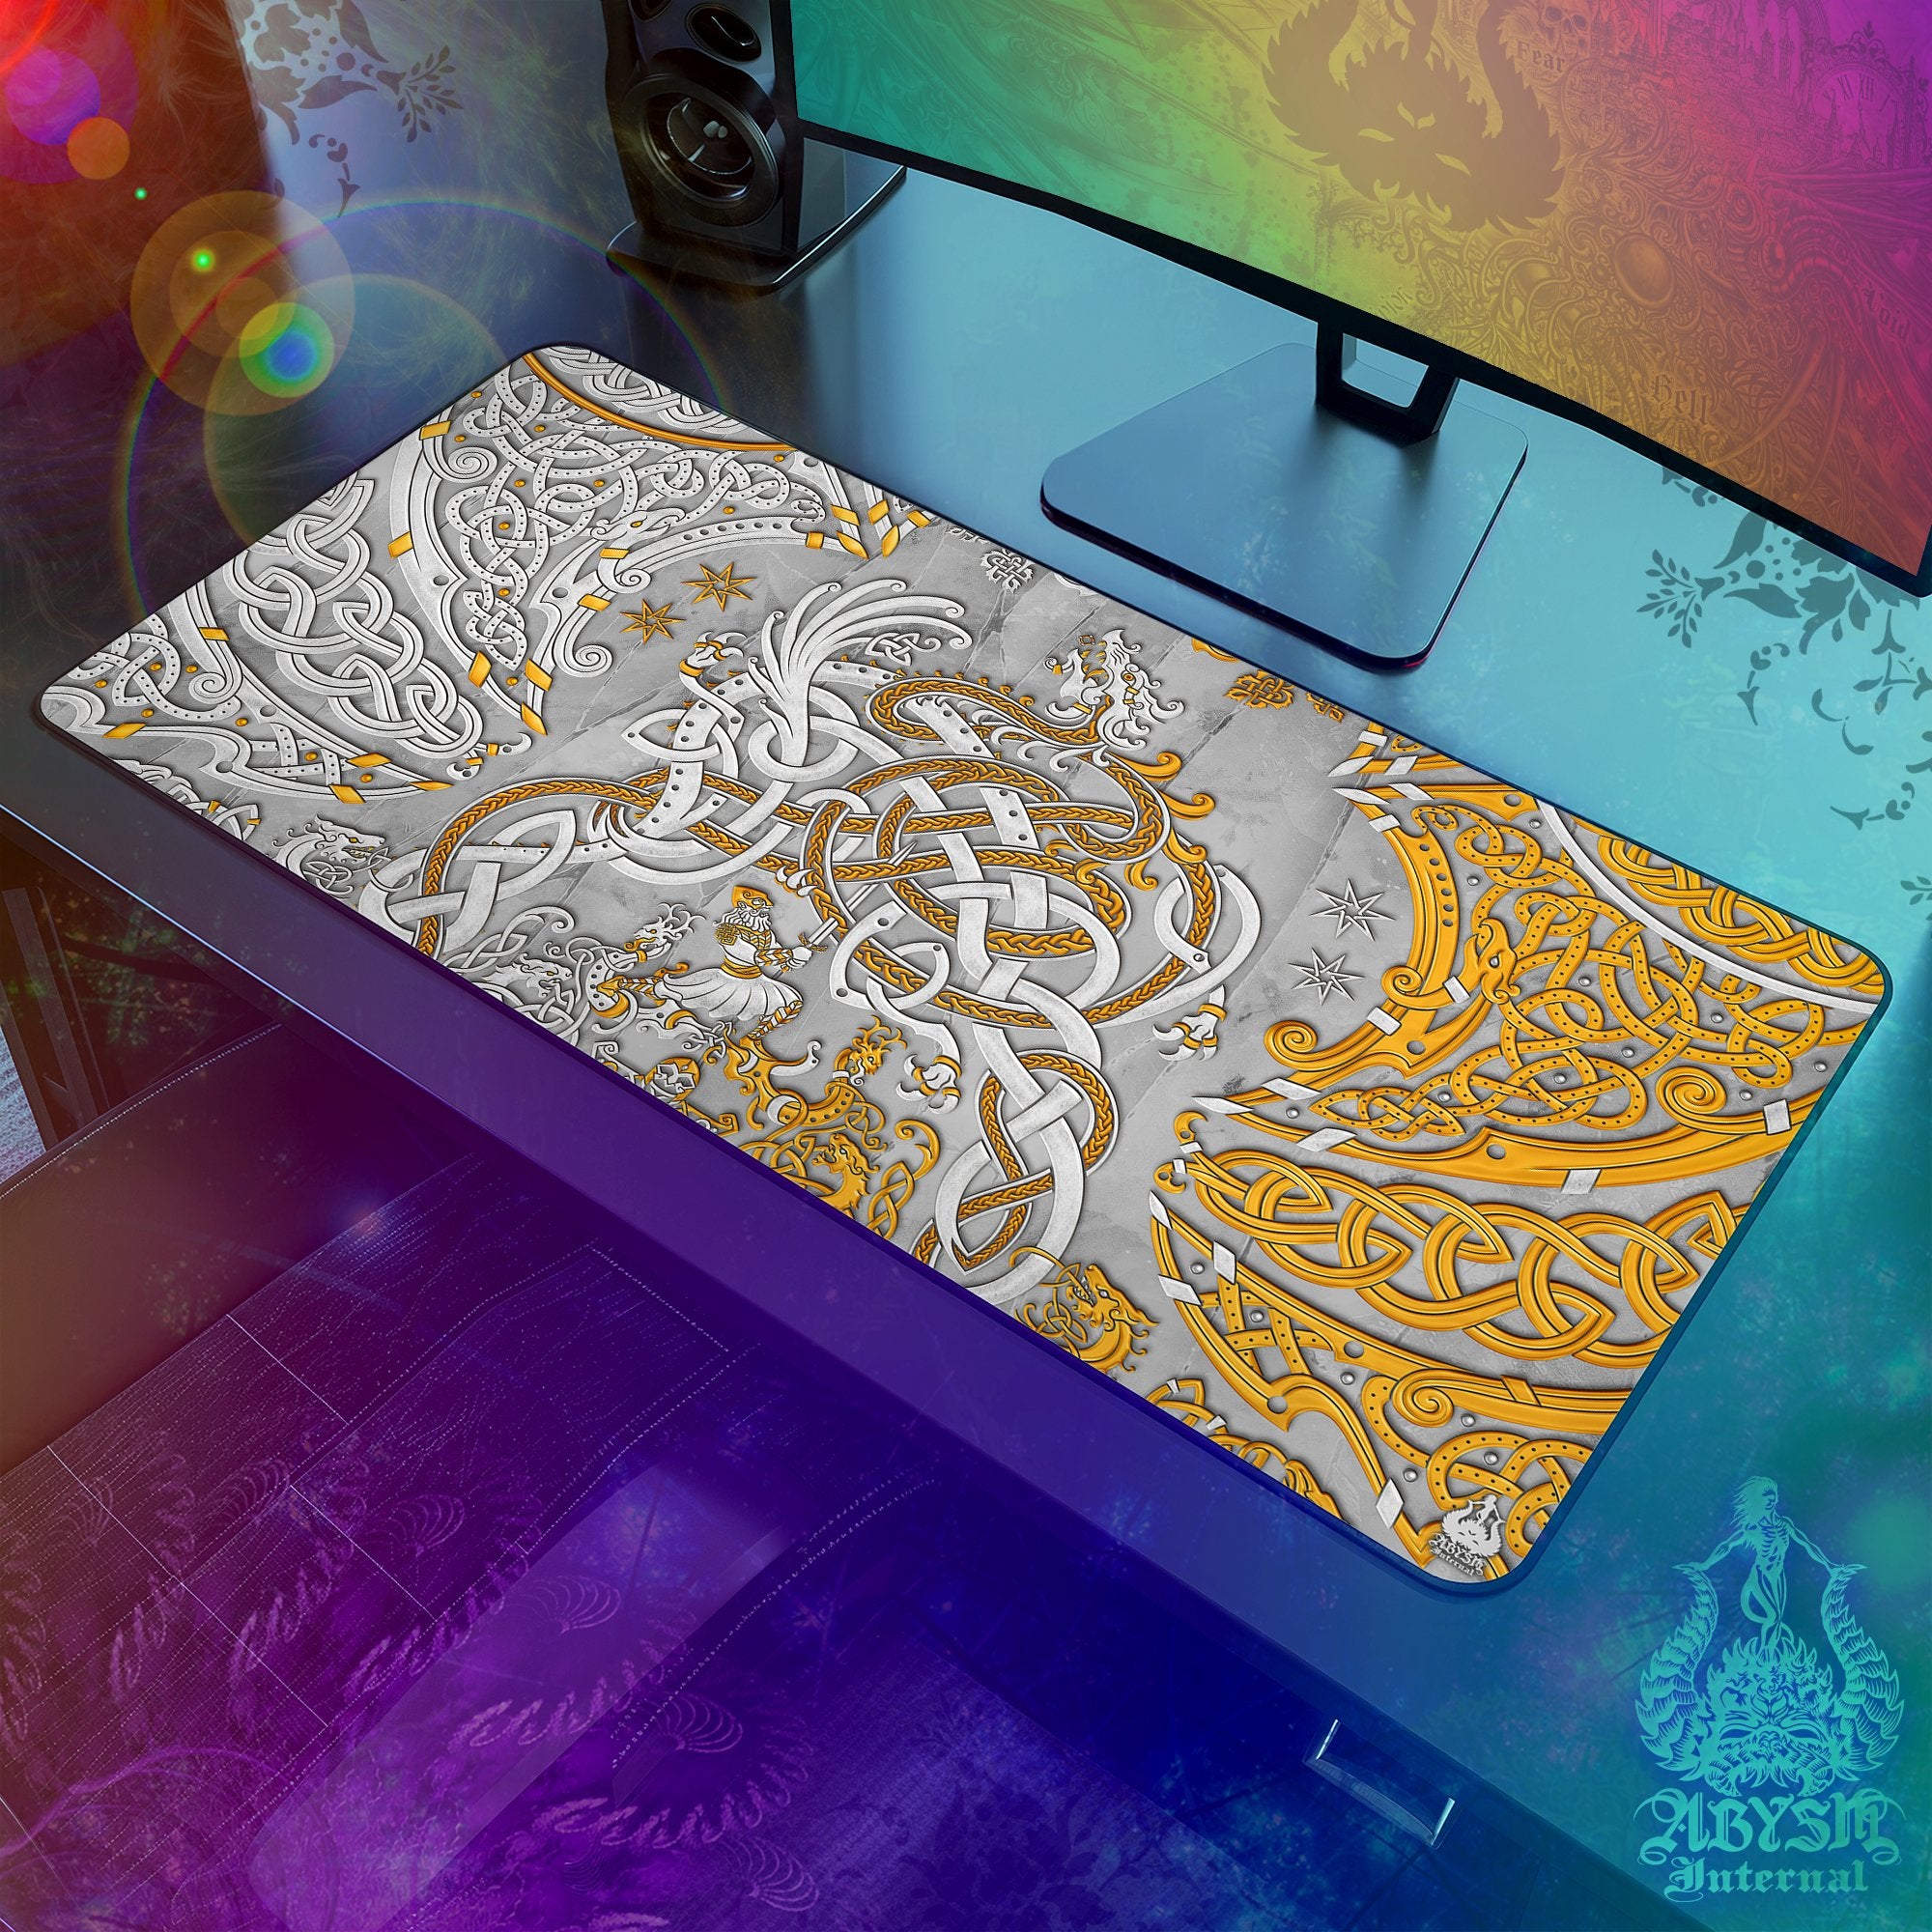 Norse Dragon Gaming Mouse Pad, Viking Desk Mat, Nordic Knotwork Table Protector Cover, Fafnir Workpad, Art Print - Stone and Gold, 2 Colors - Abysm Internal